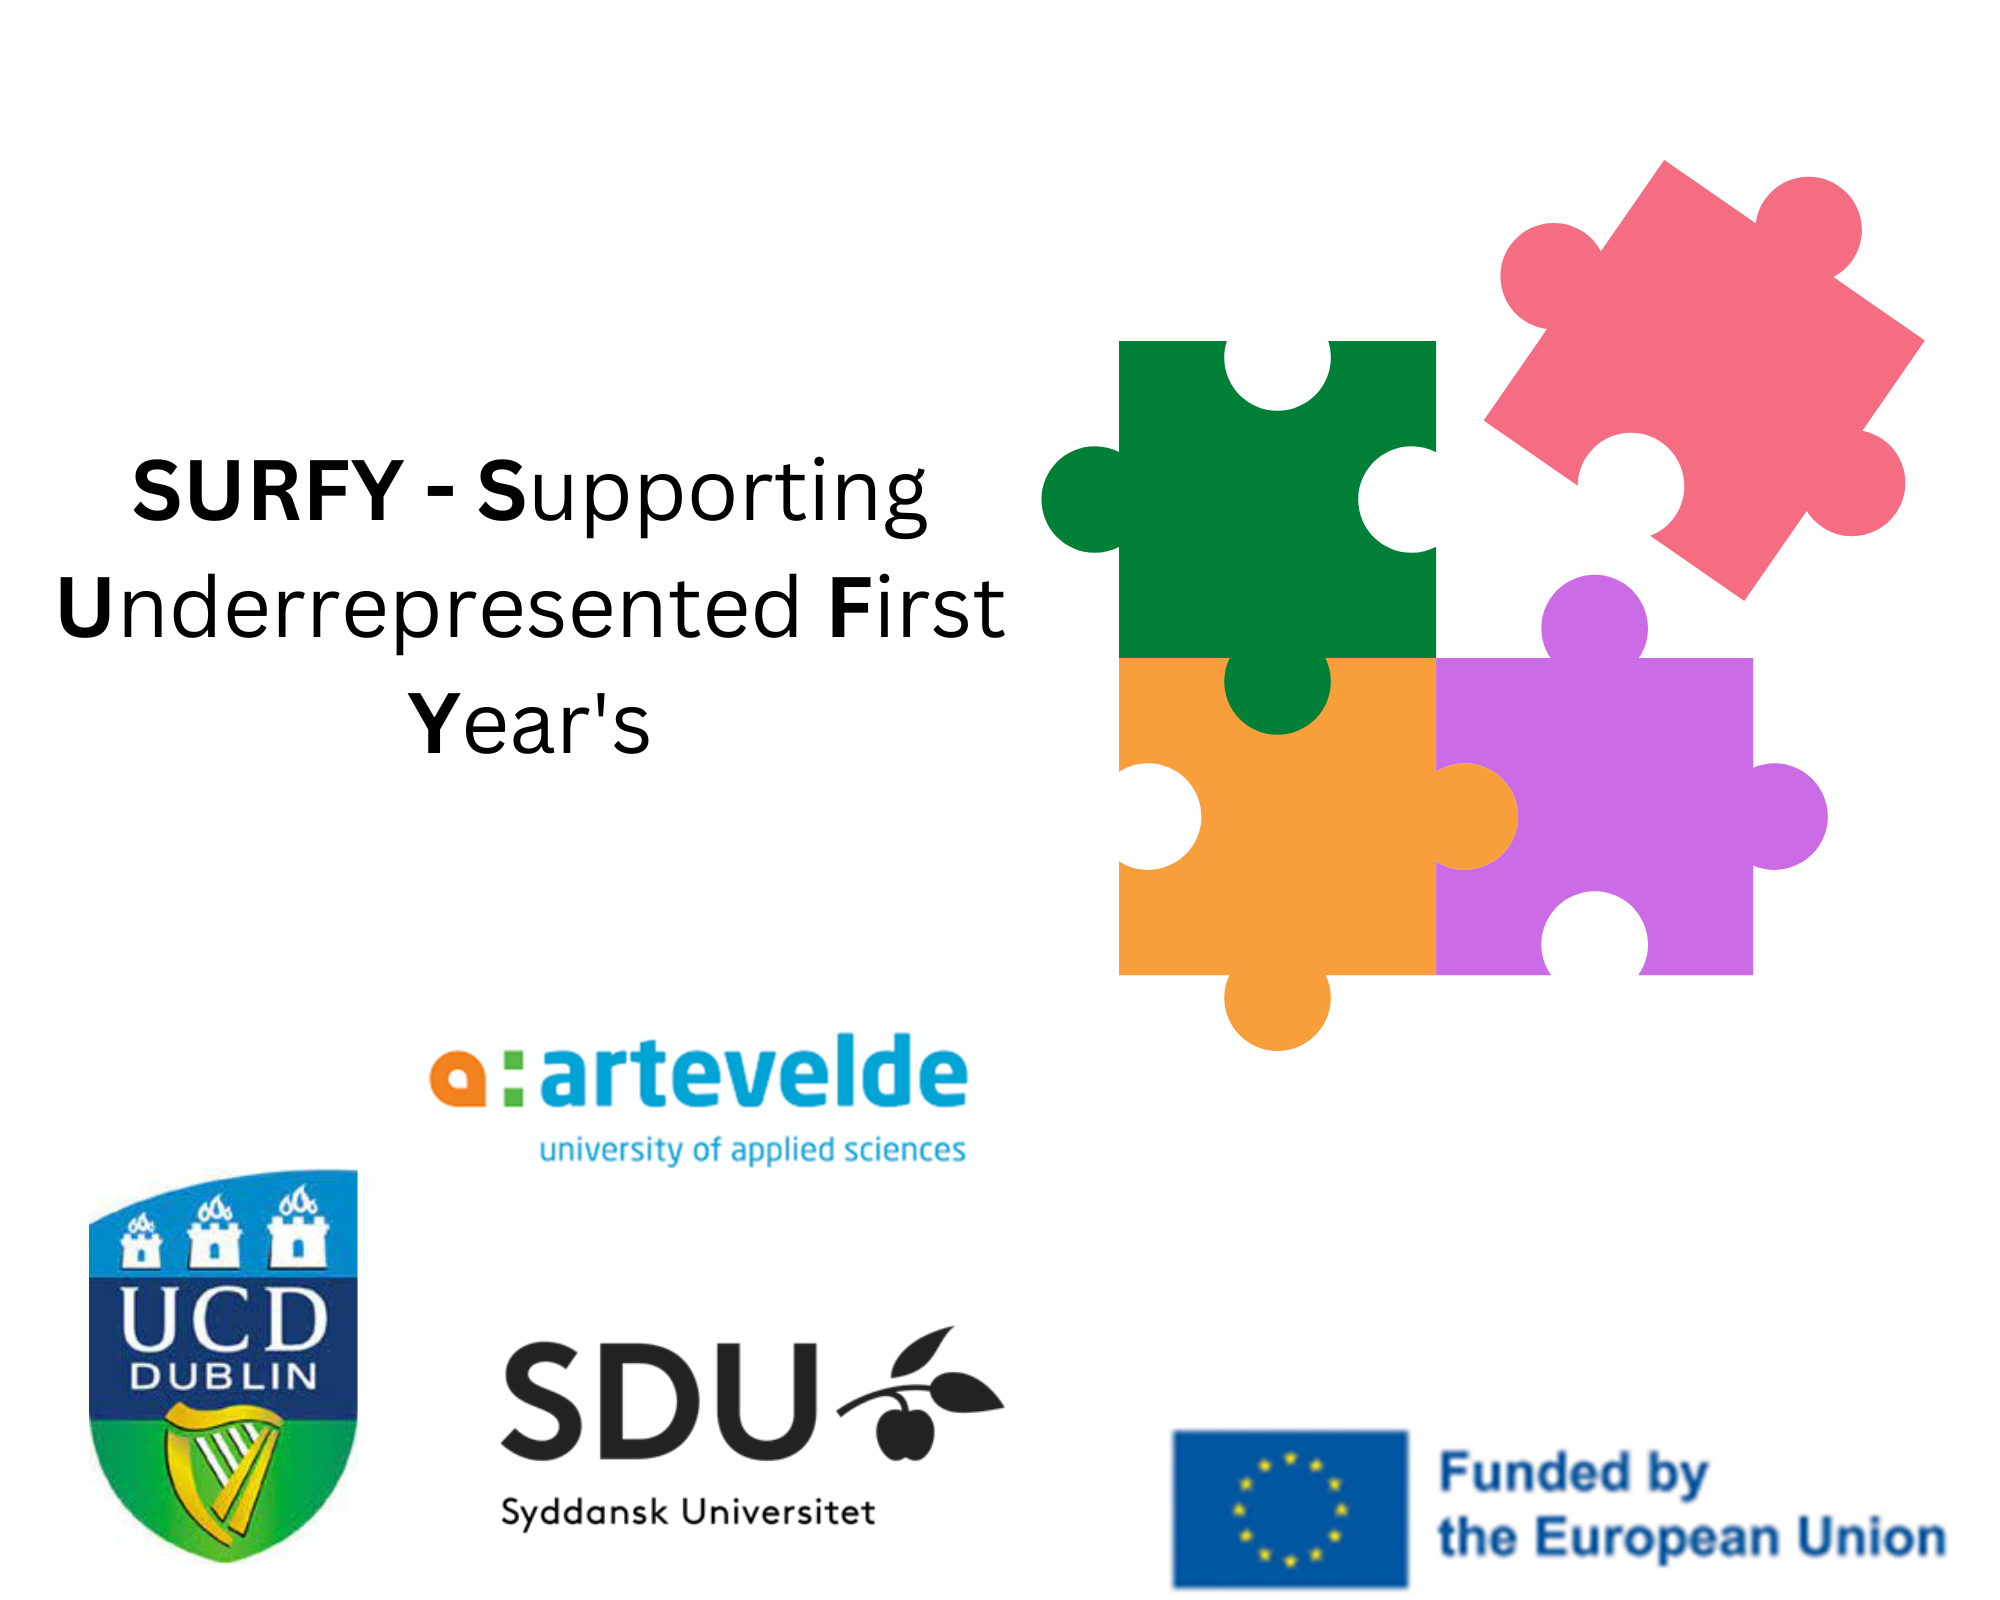 Image saying SURFY - Supporting Underrepresented First Years, the UCD logo, Artevelde University of Applied Sciences logo and the University of Southern Denmark logo, Logo of Euopean funding and an image of 4 jigsaw pieces.